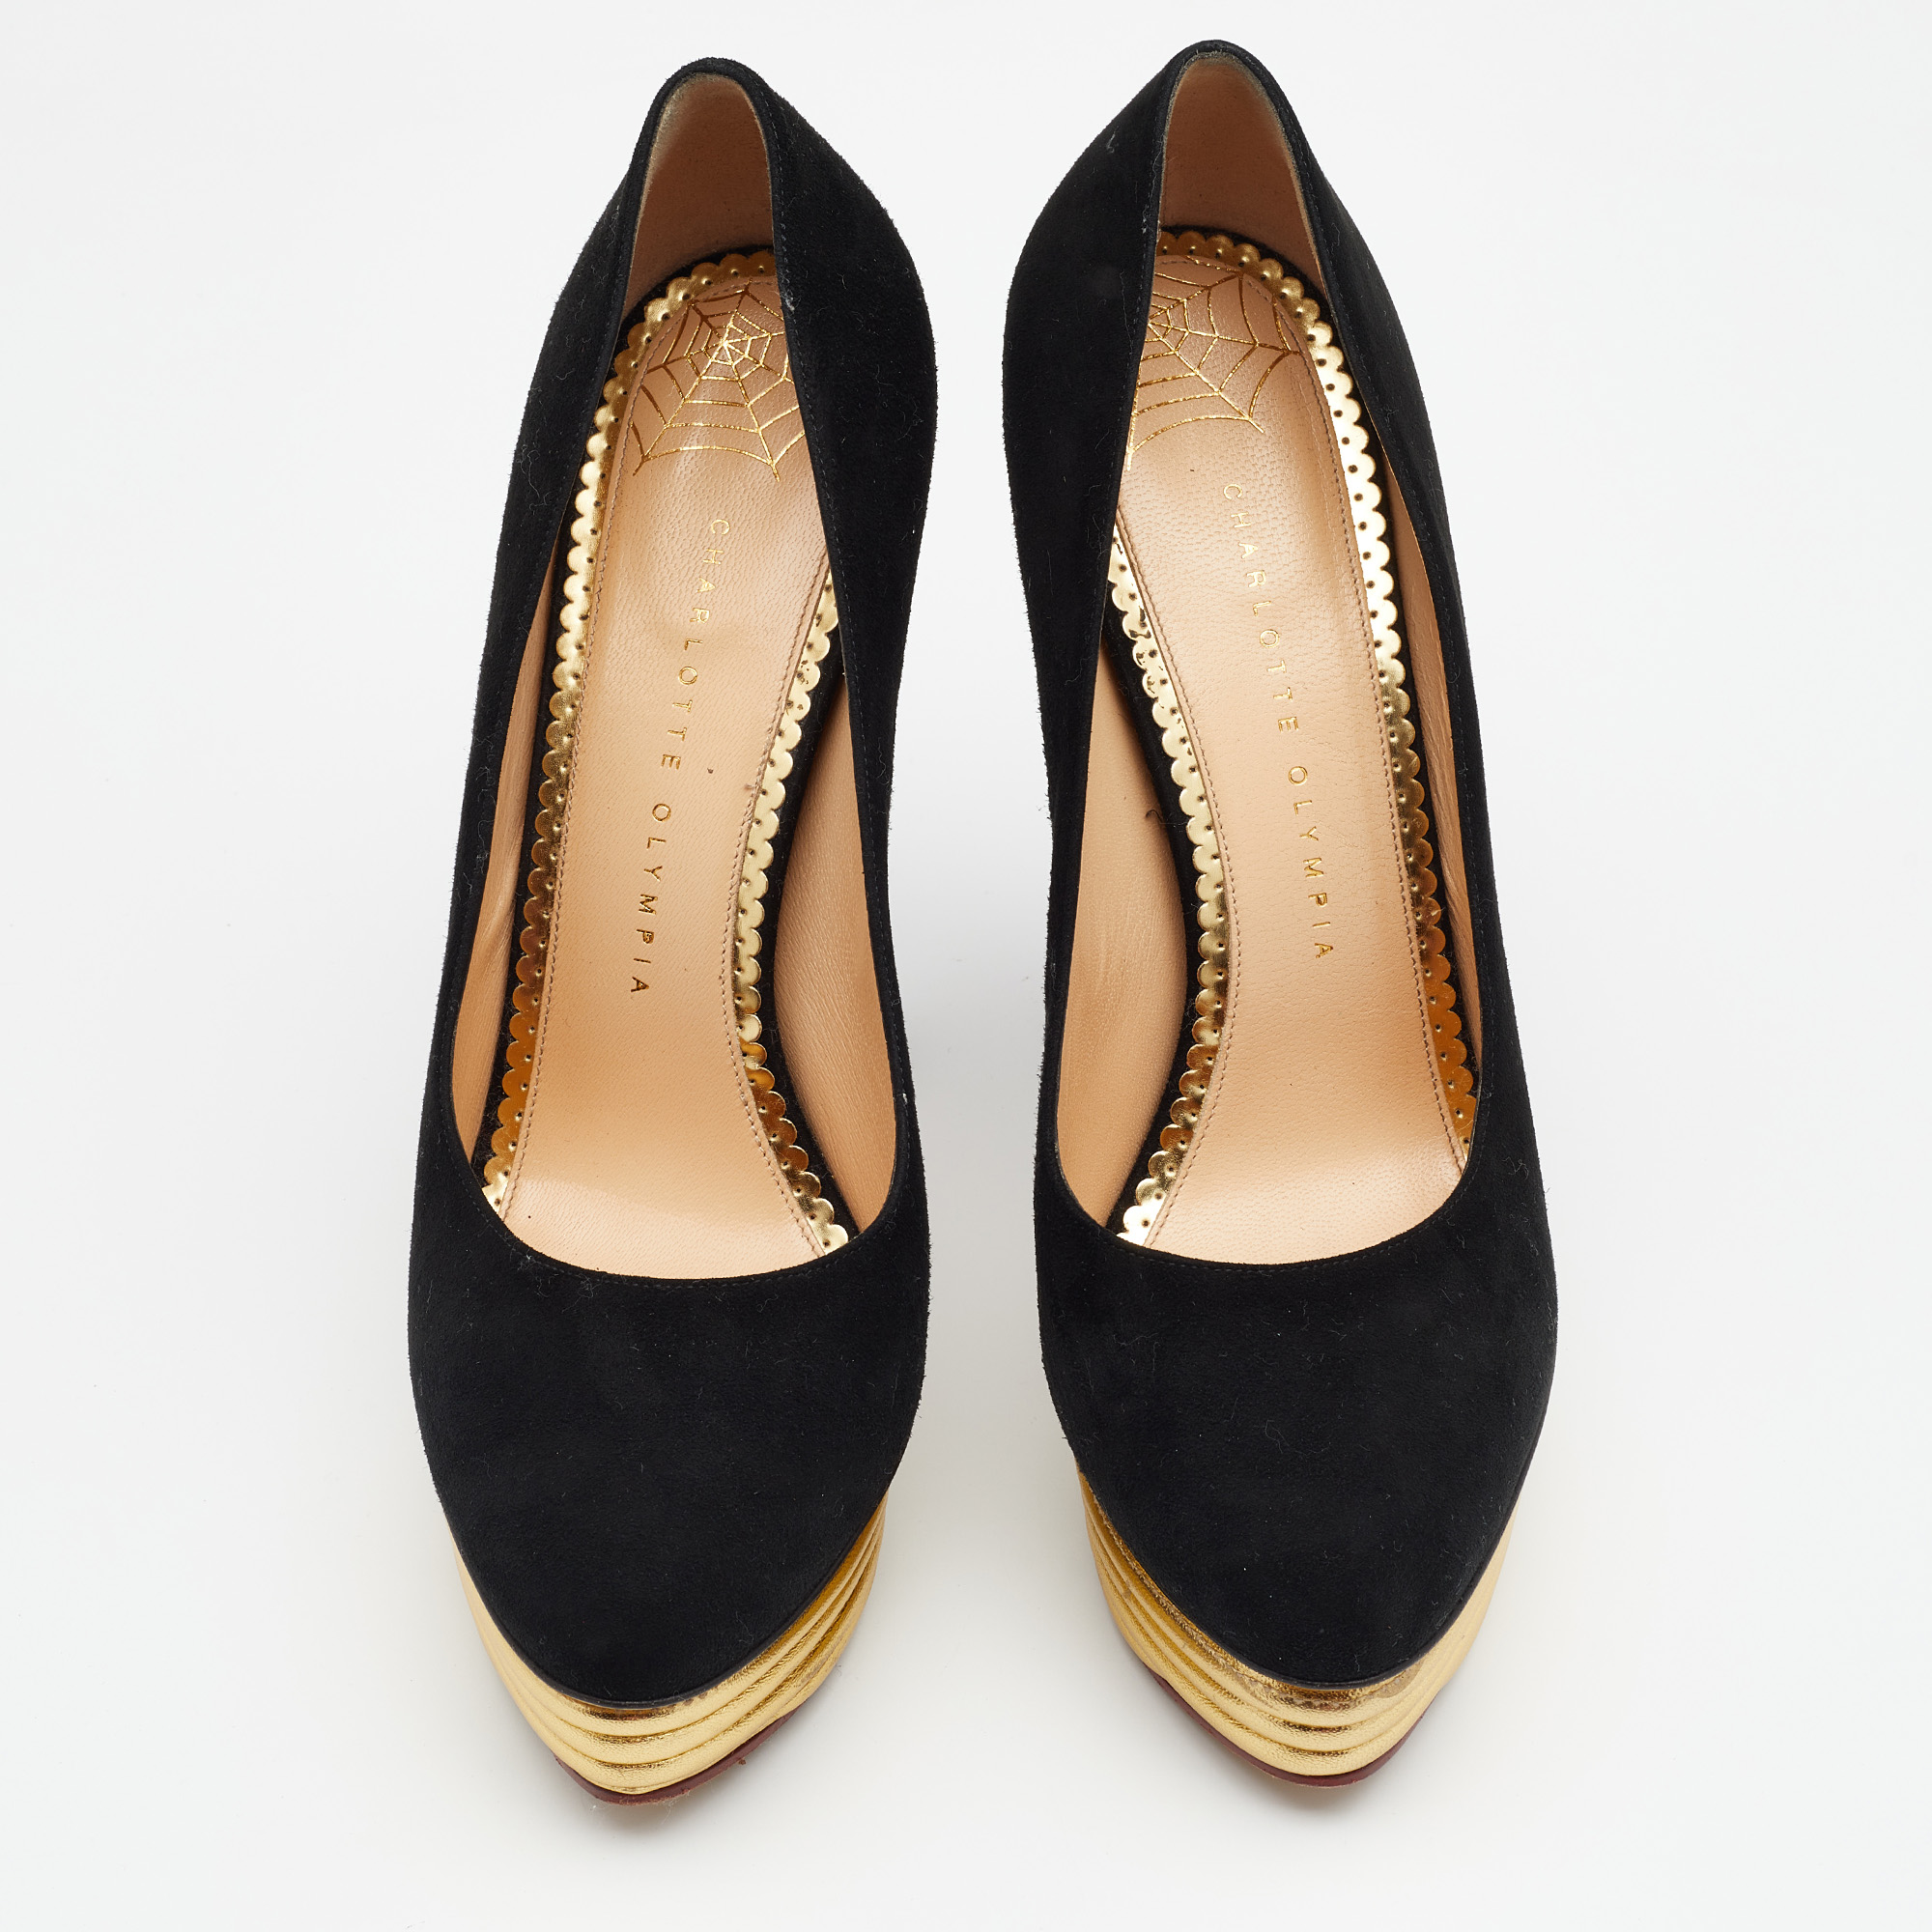 Charlotte Olympia Black Suede Dolly Platform Pumps Size 41